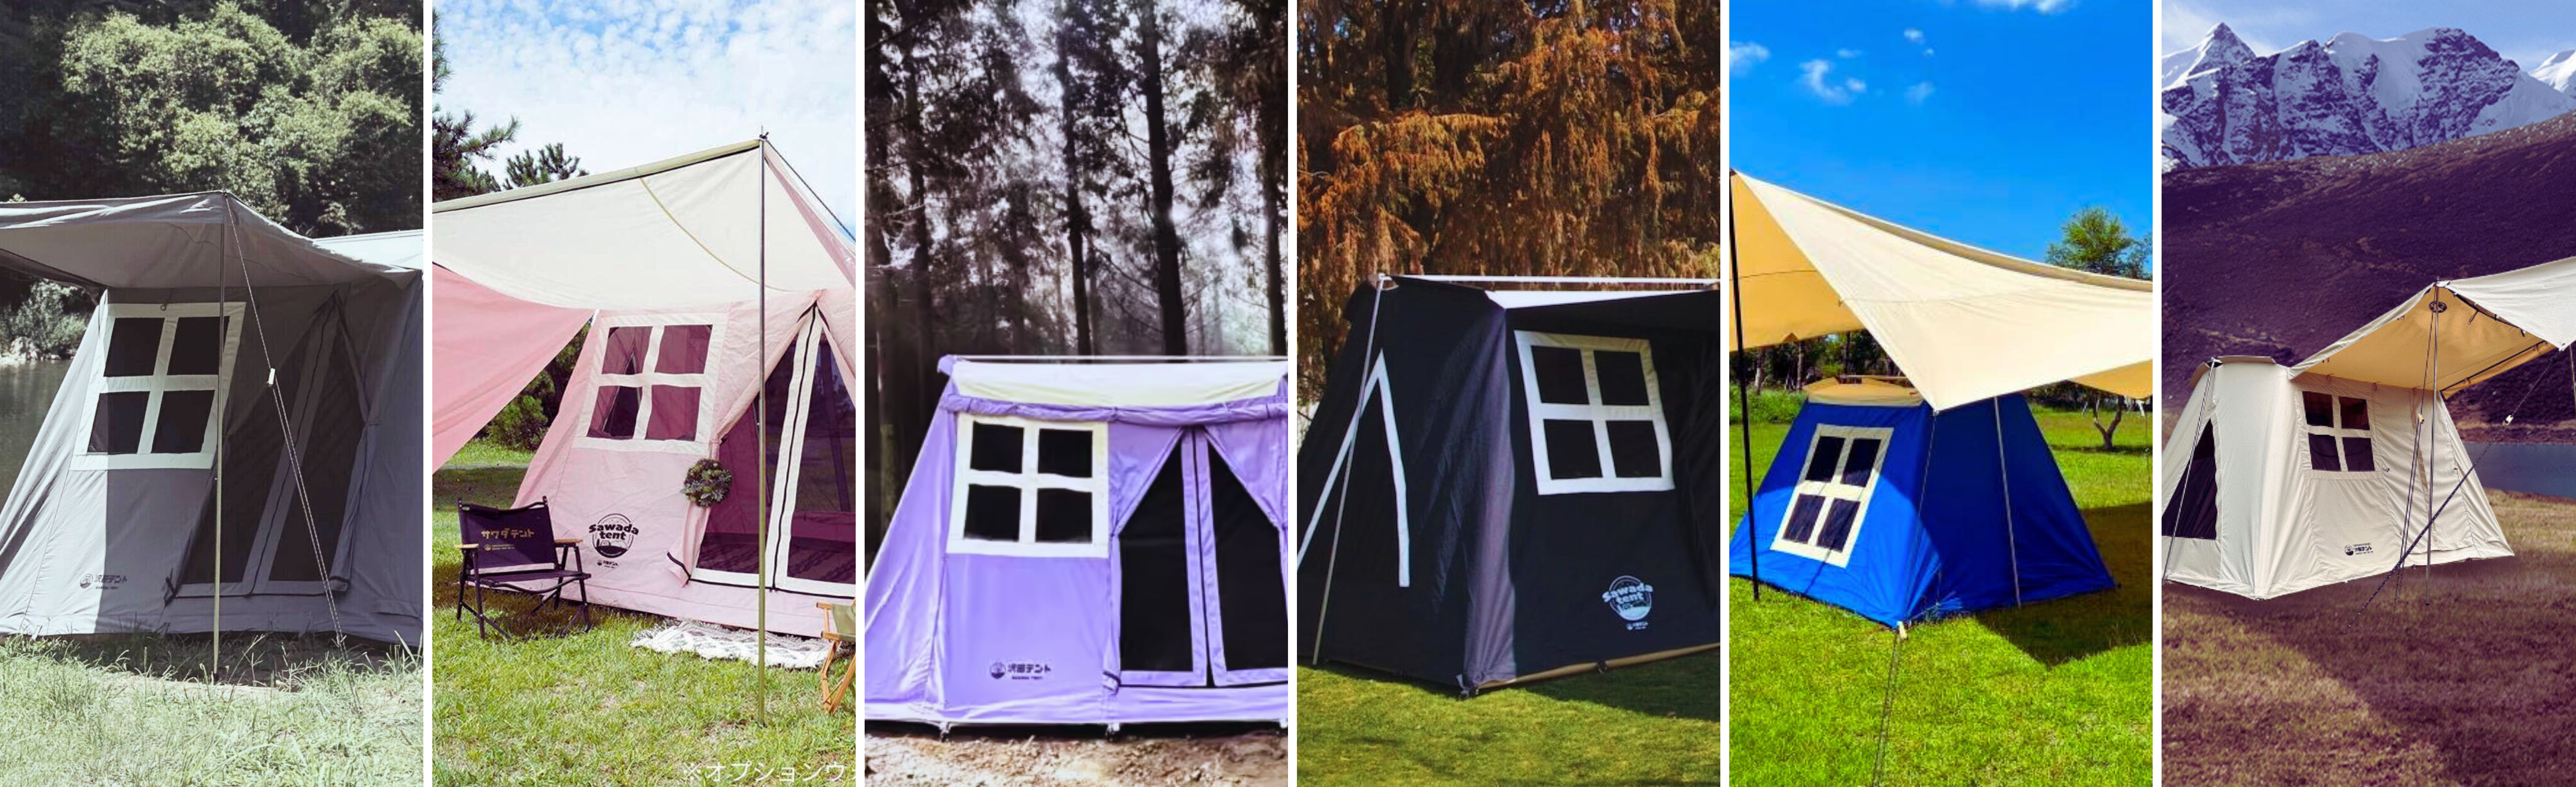 Personalise Your Tent